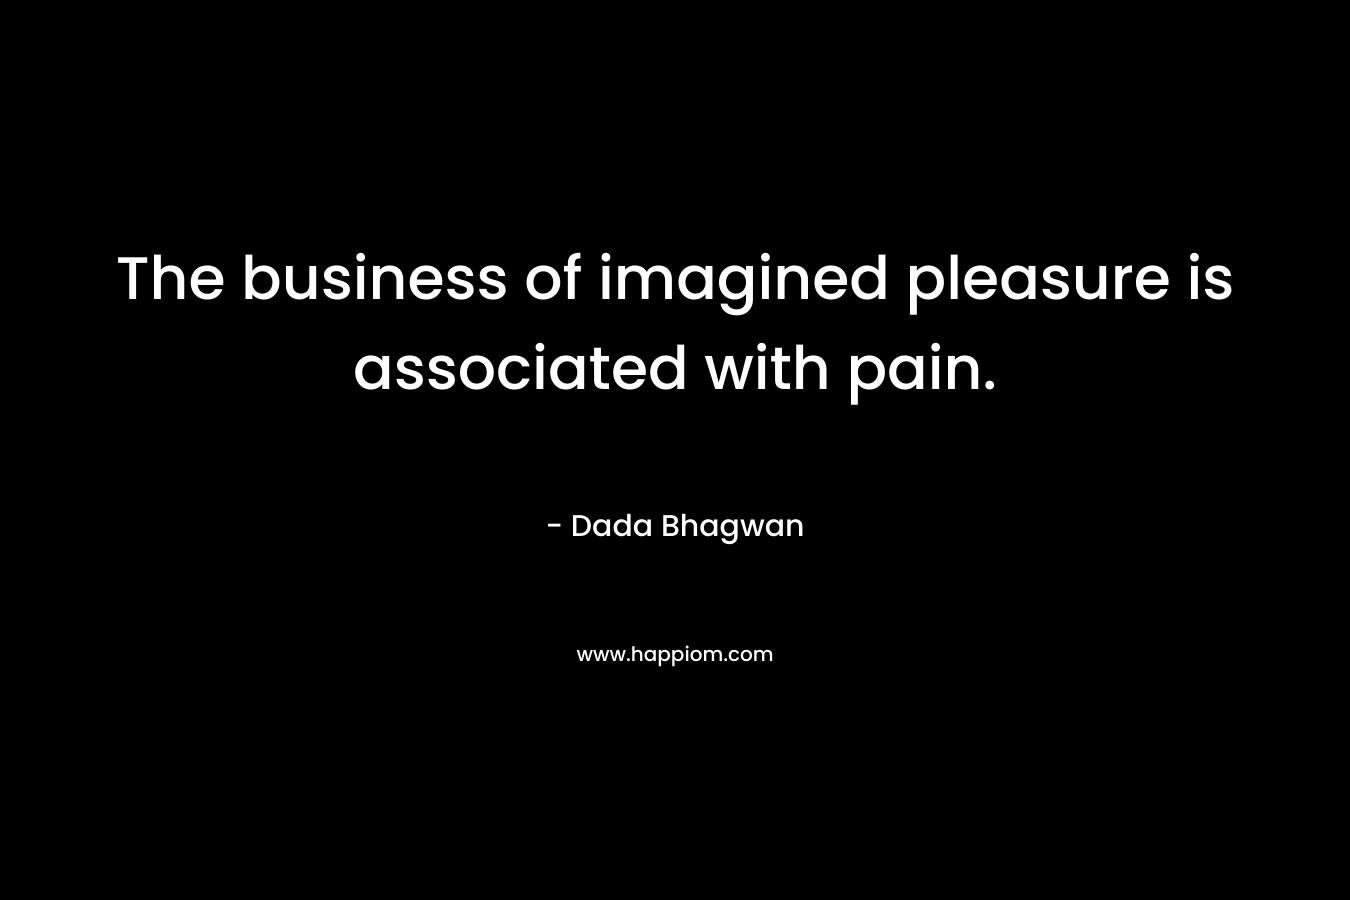 The business of imagined pleasure is associated with pain.